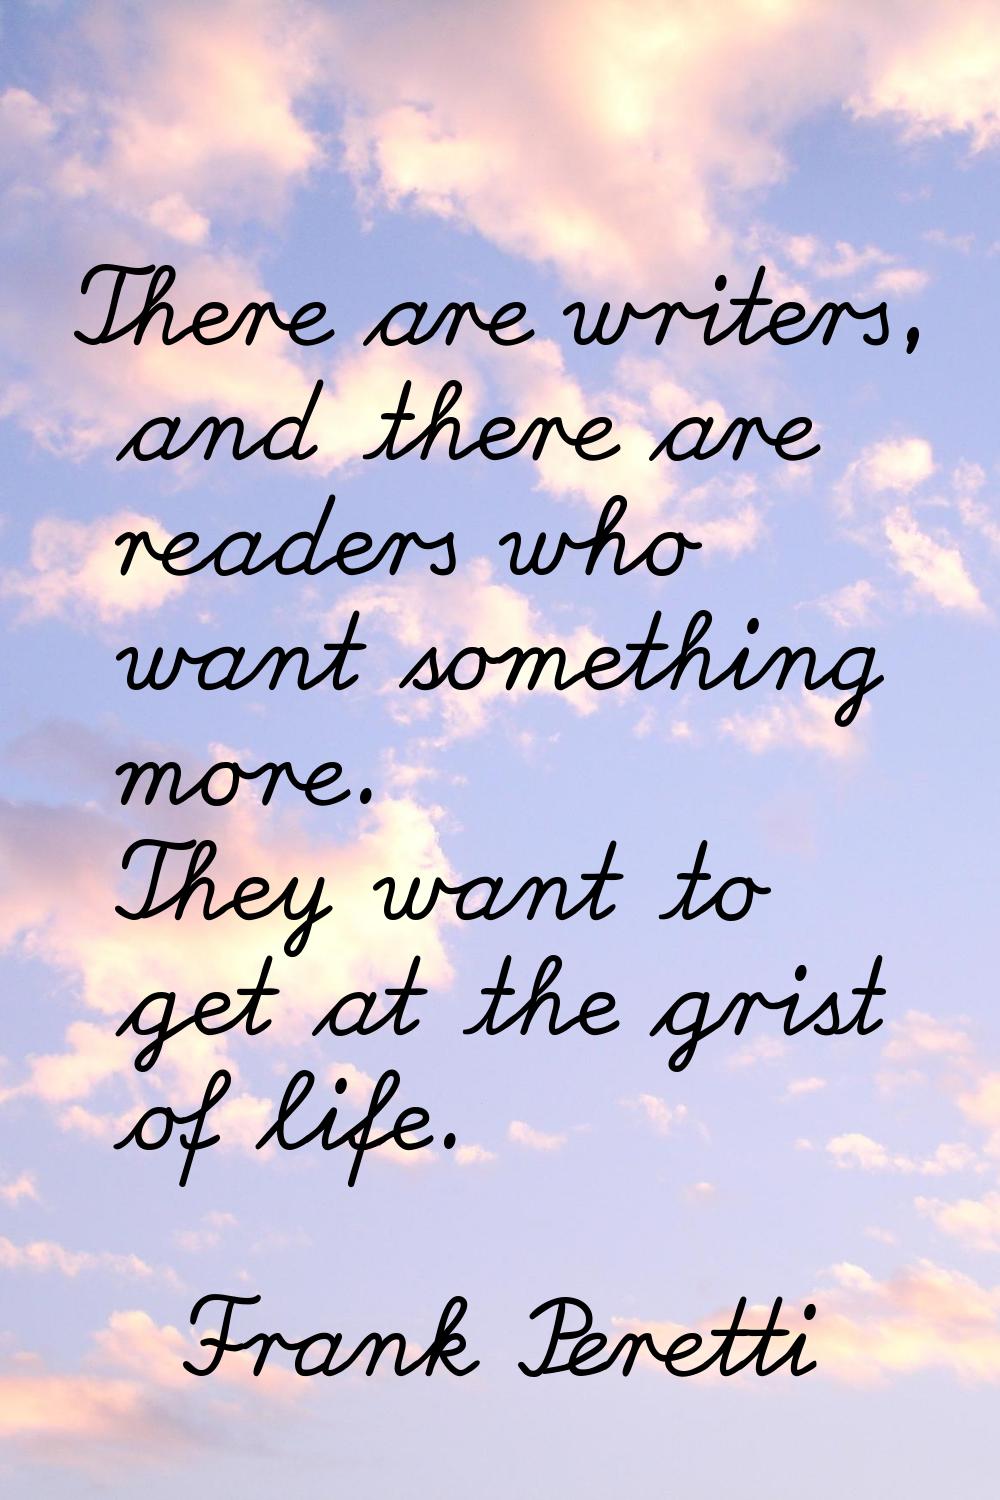 There are writers, and there are readers who want something more. They want to get at the grist of 